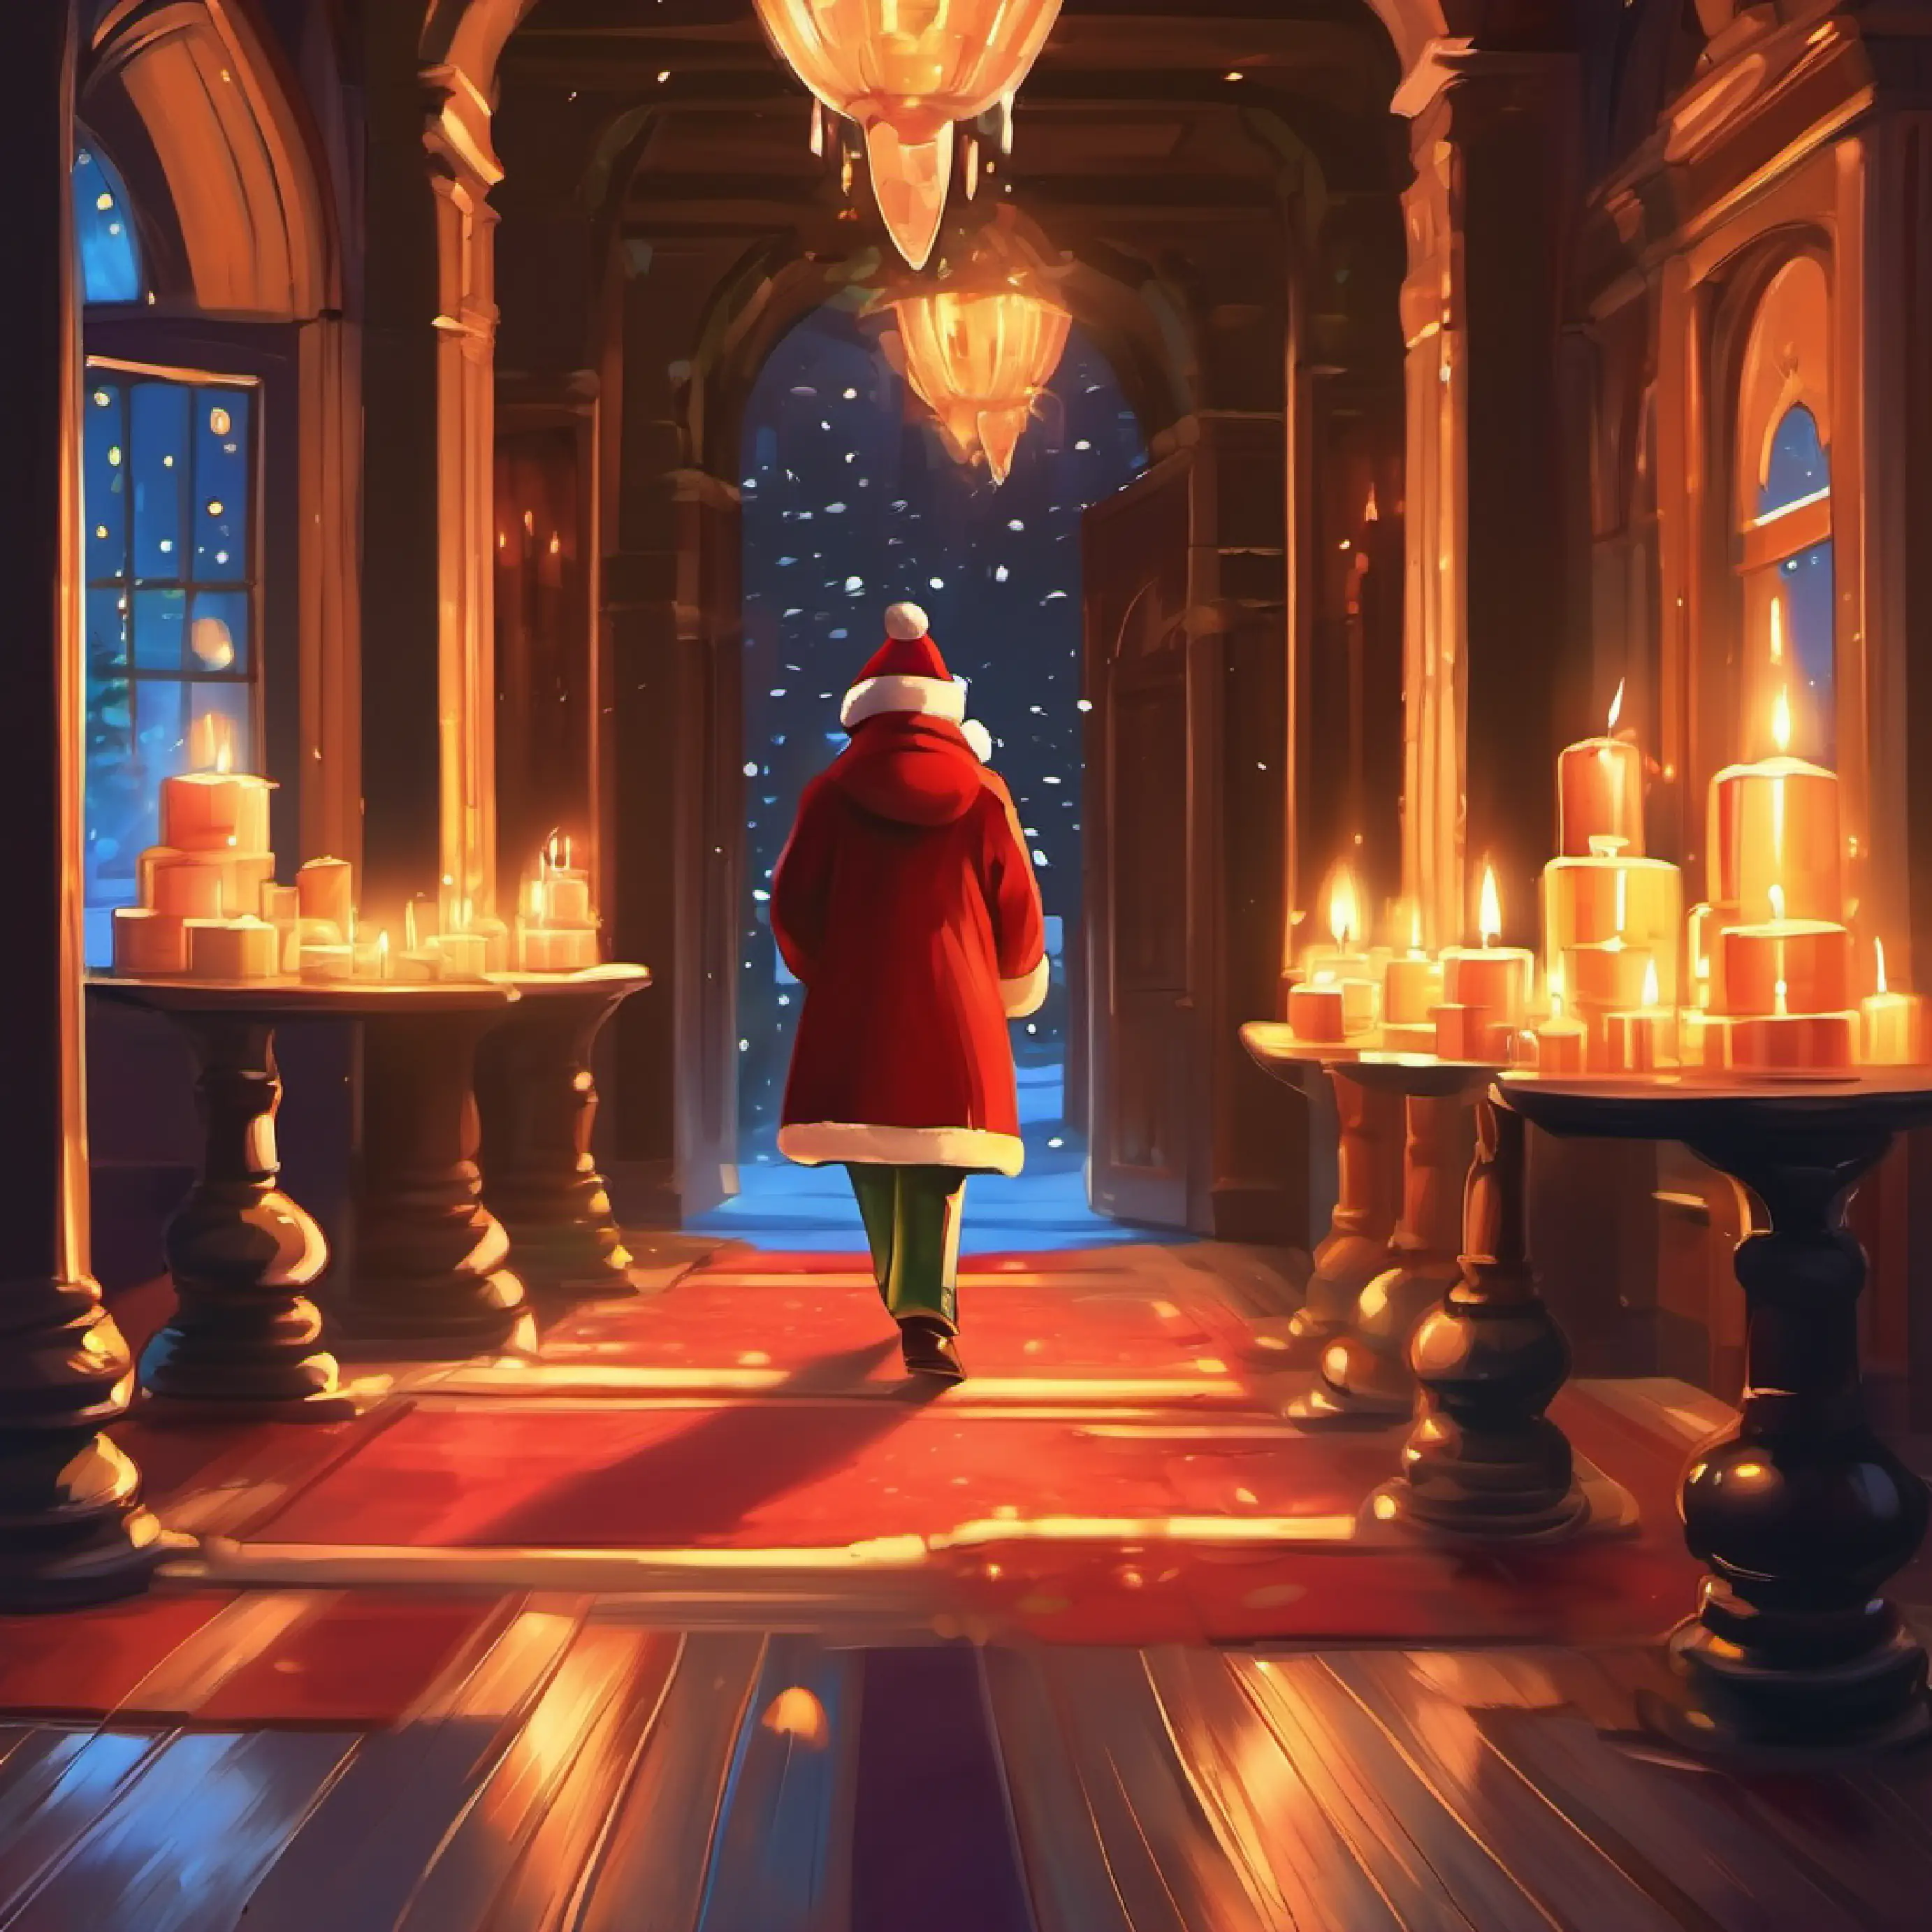 Main character walks through a hall with mysteriously lighting candles.